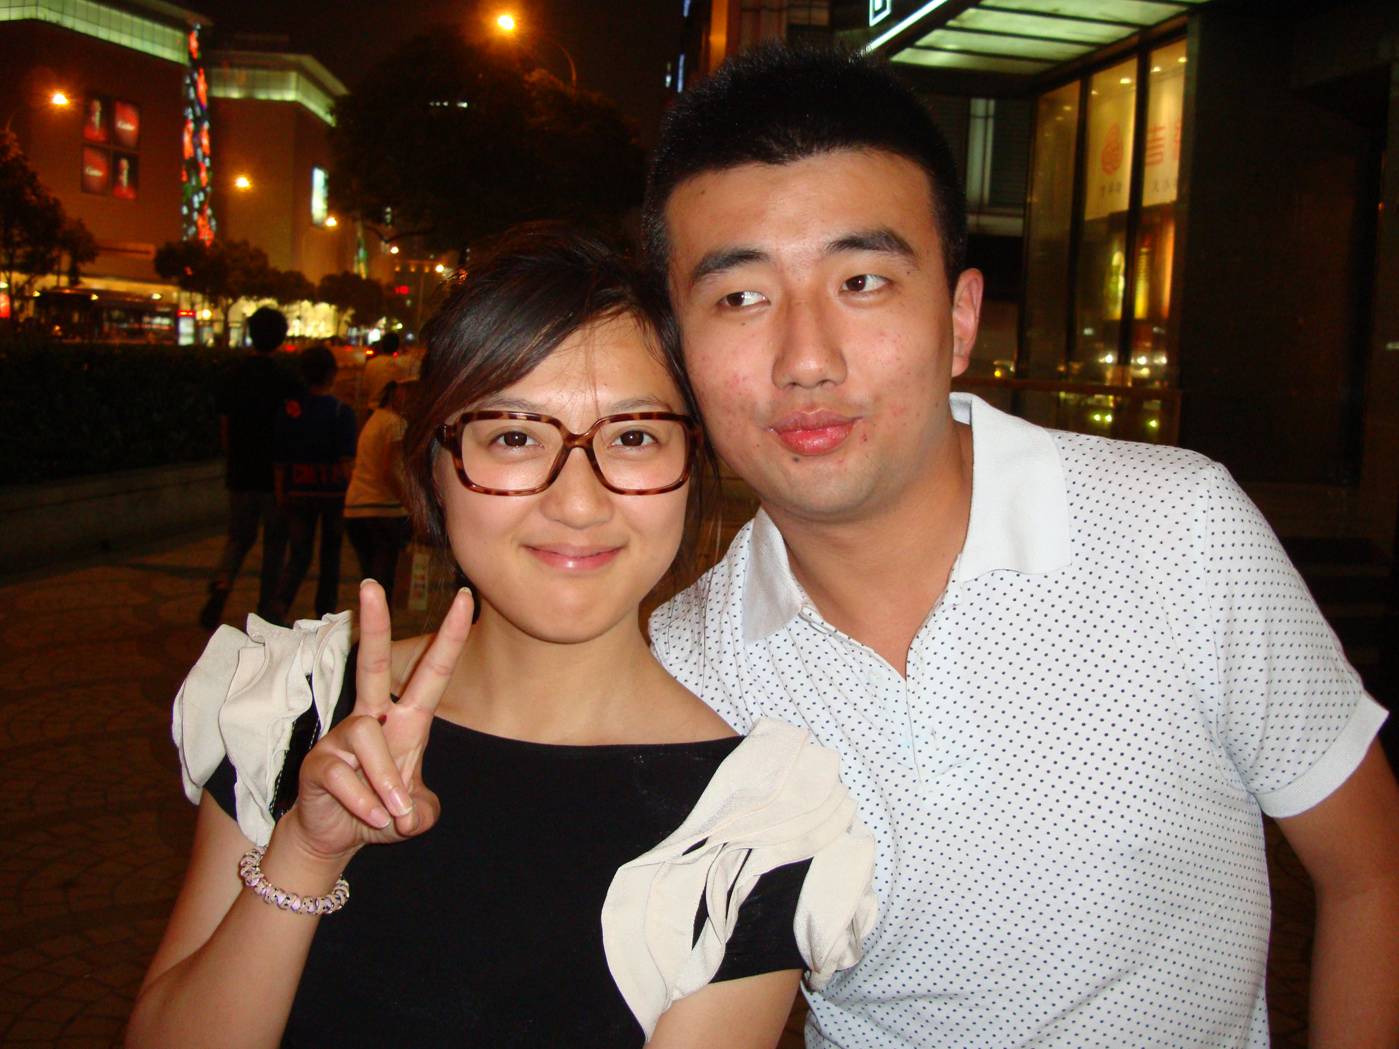 Picture:  Katherine and Clark.  There is no class in her glasses.  Wuxi, China